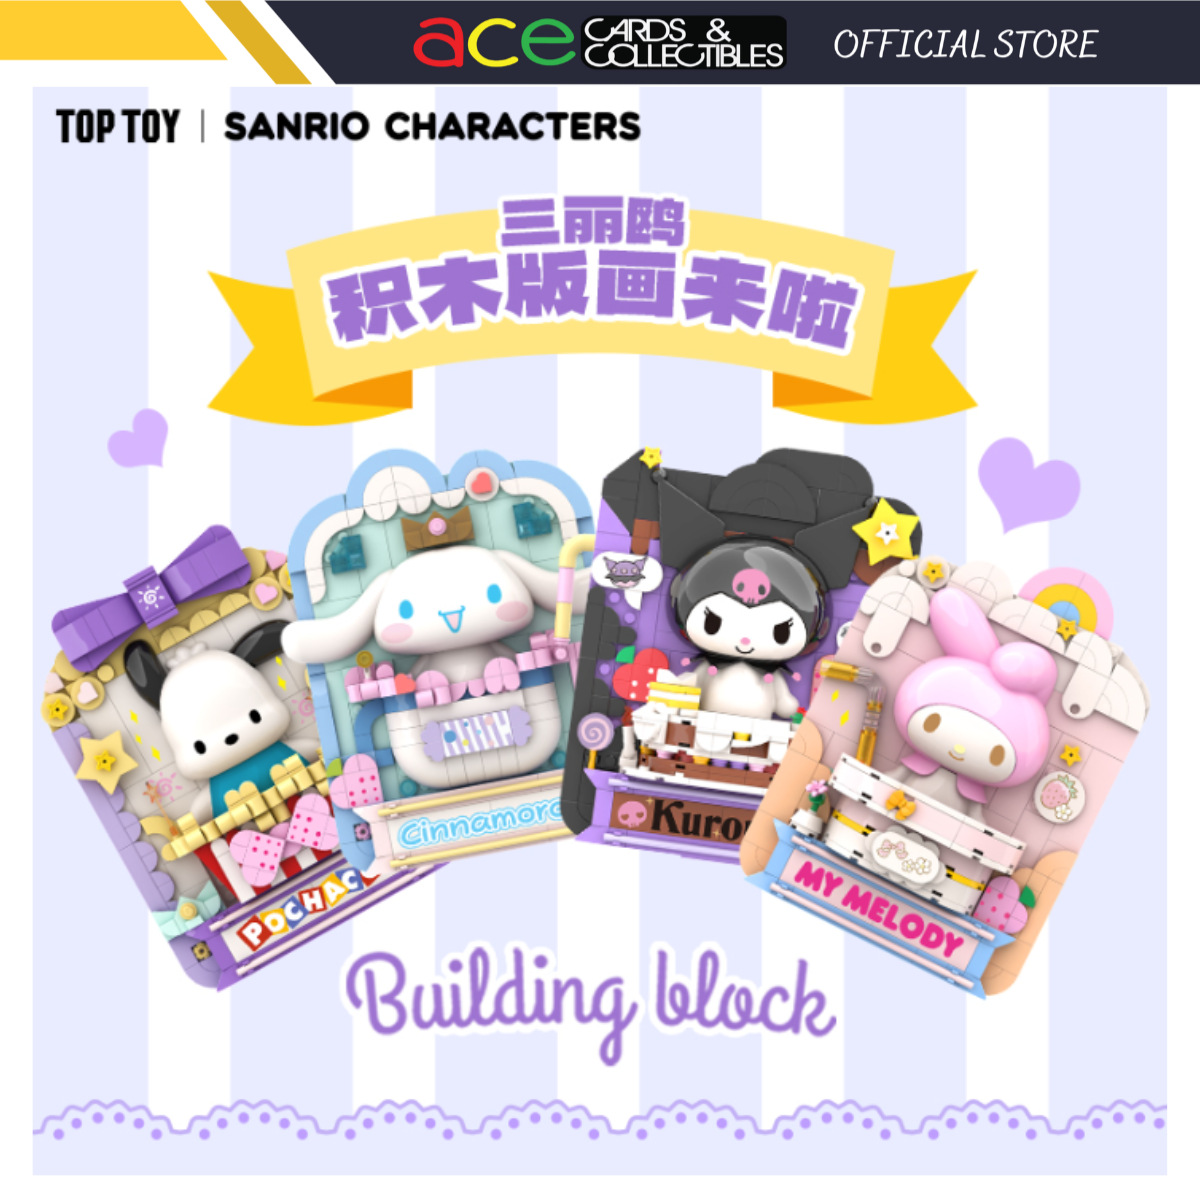 Top Toy x Sanrio Characters Building Blocks Print-Pochacco-TopToy-Ace Cards & Collectibles